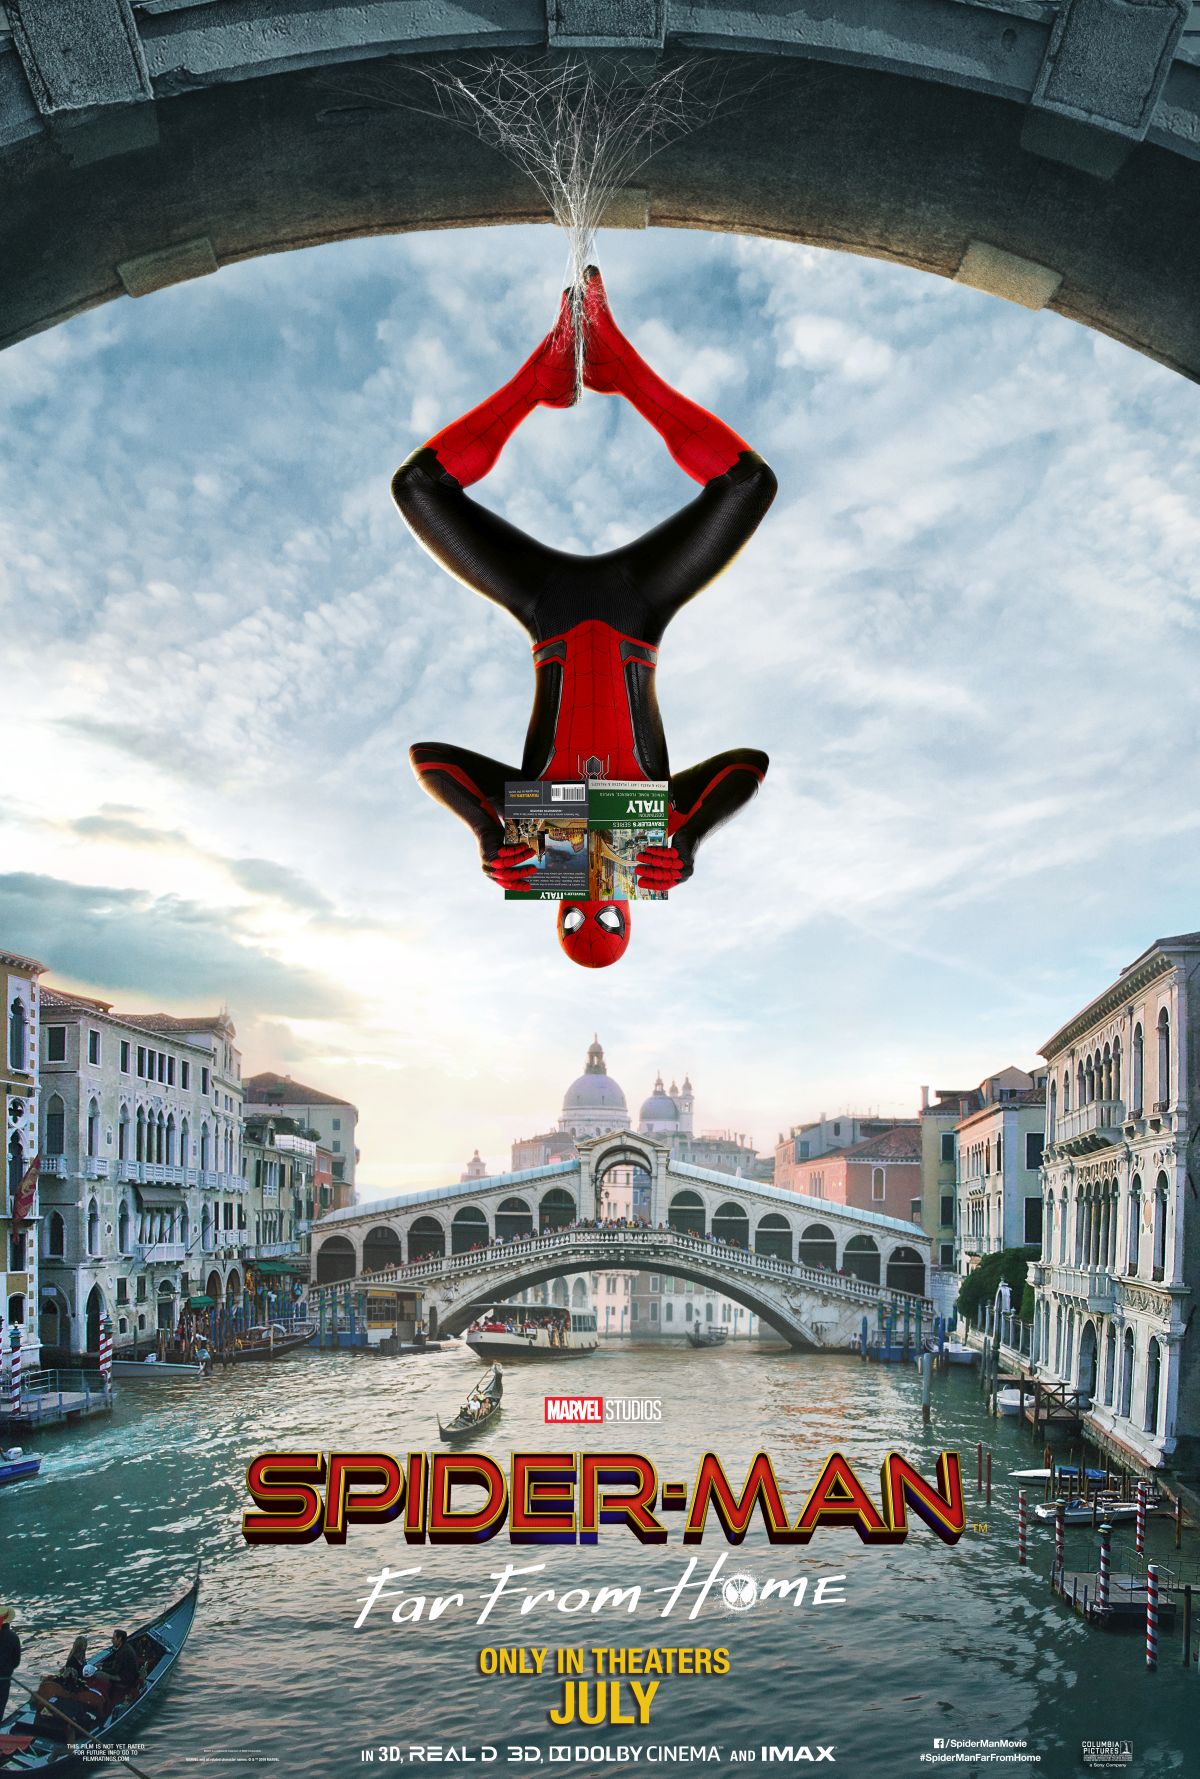 Spider-Man Goes International in New Far From Home Posters